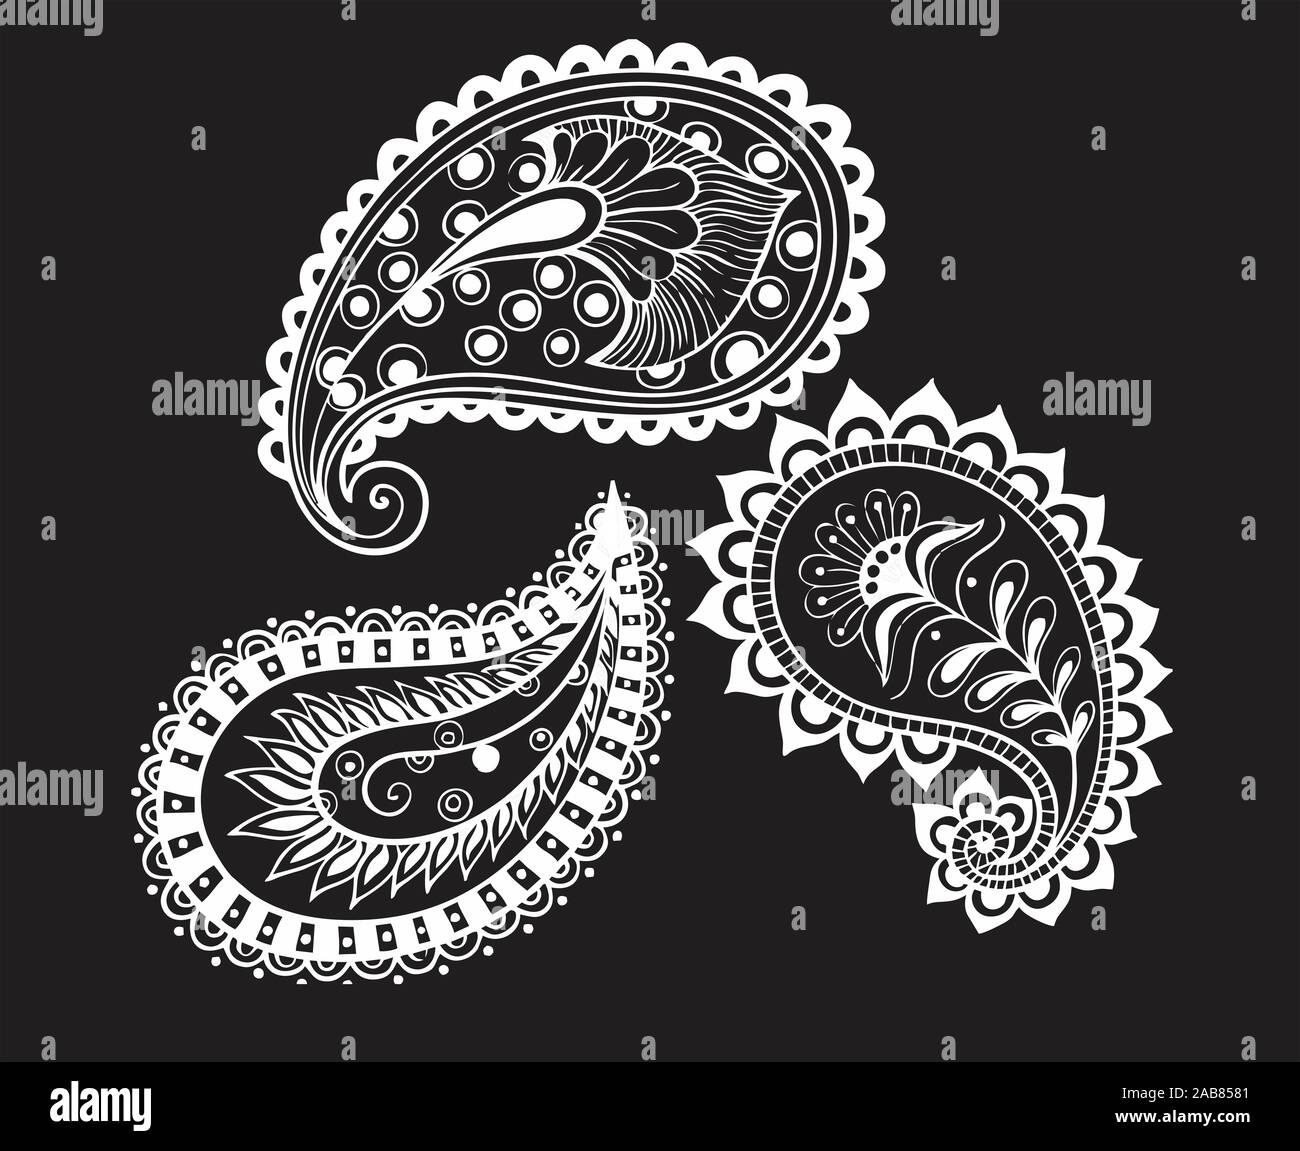 GRAPHIC AND VECTOR DESIGNS OF TATTOOS AND FLOWERS Stock Photo - Alamy